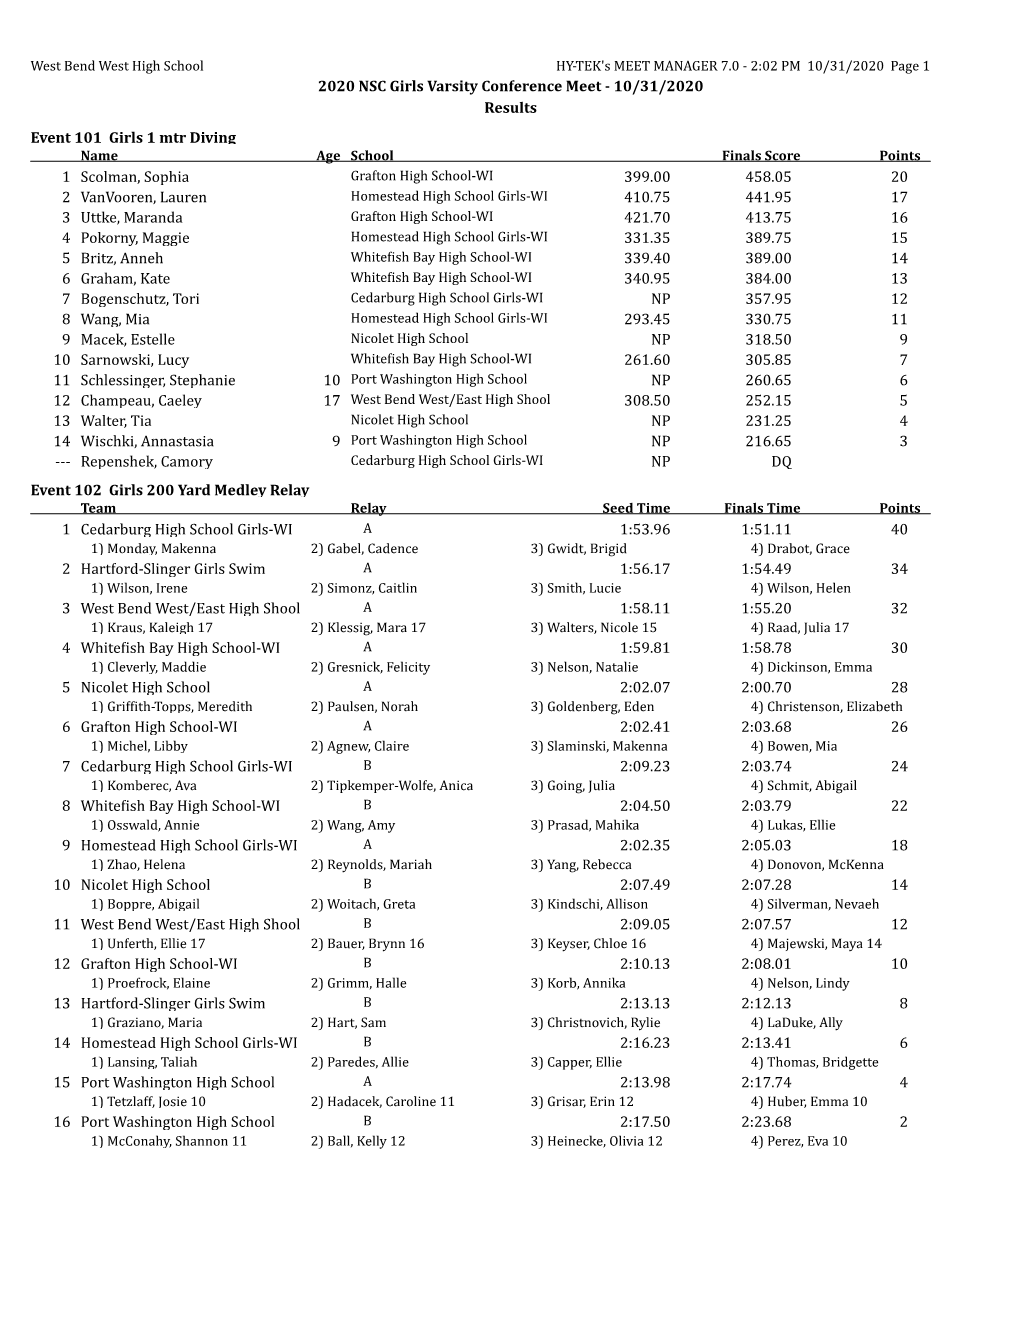 2020 NSC Girls Varsity Conference Meet - 10/31/2020 Results